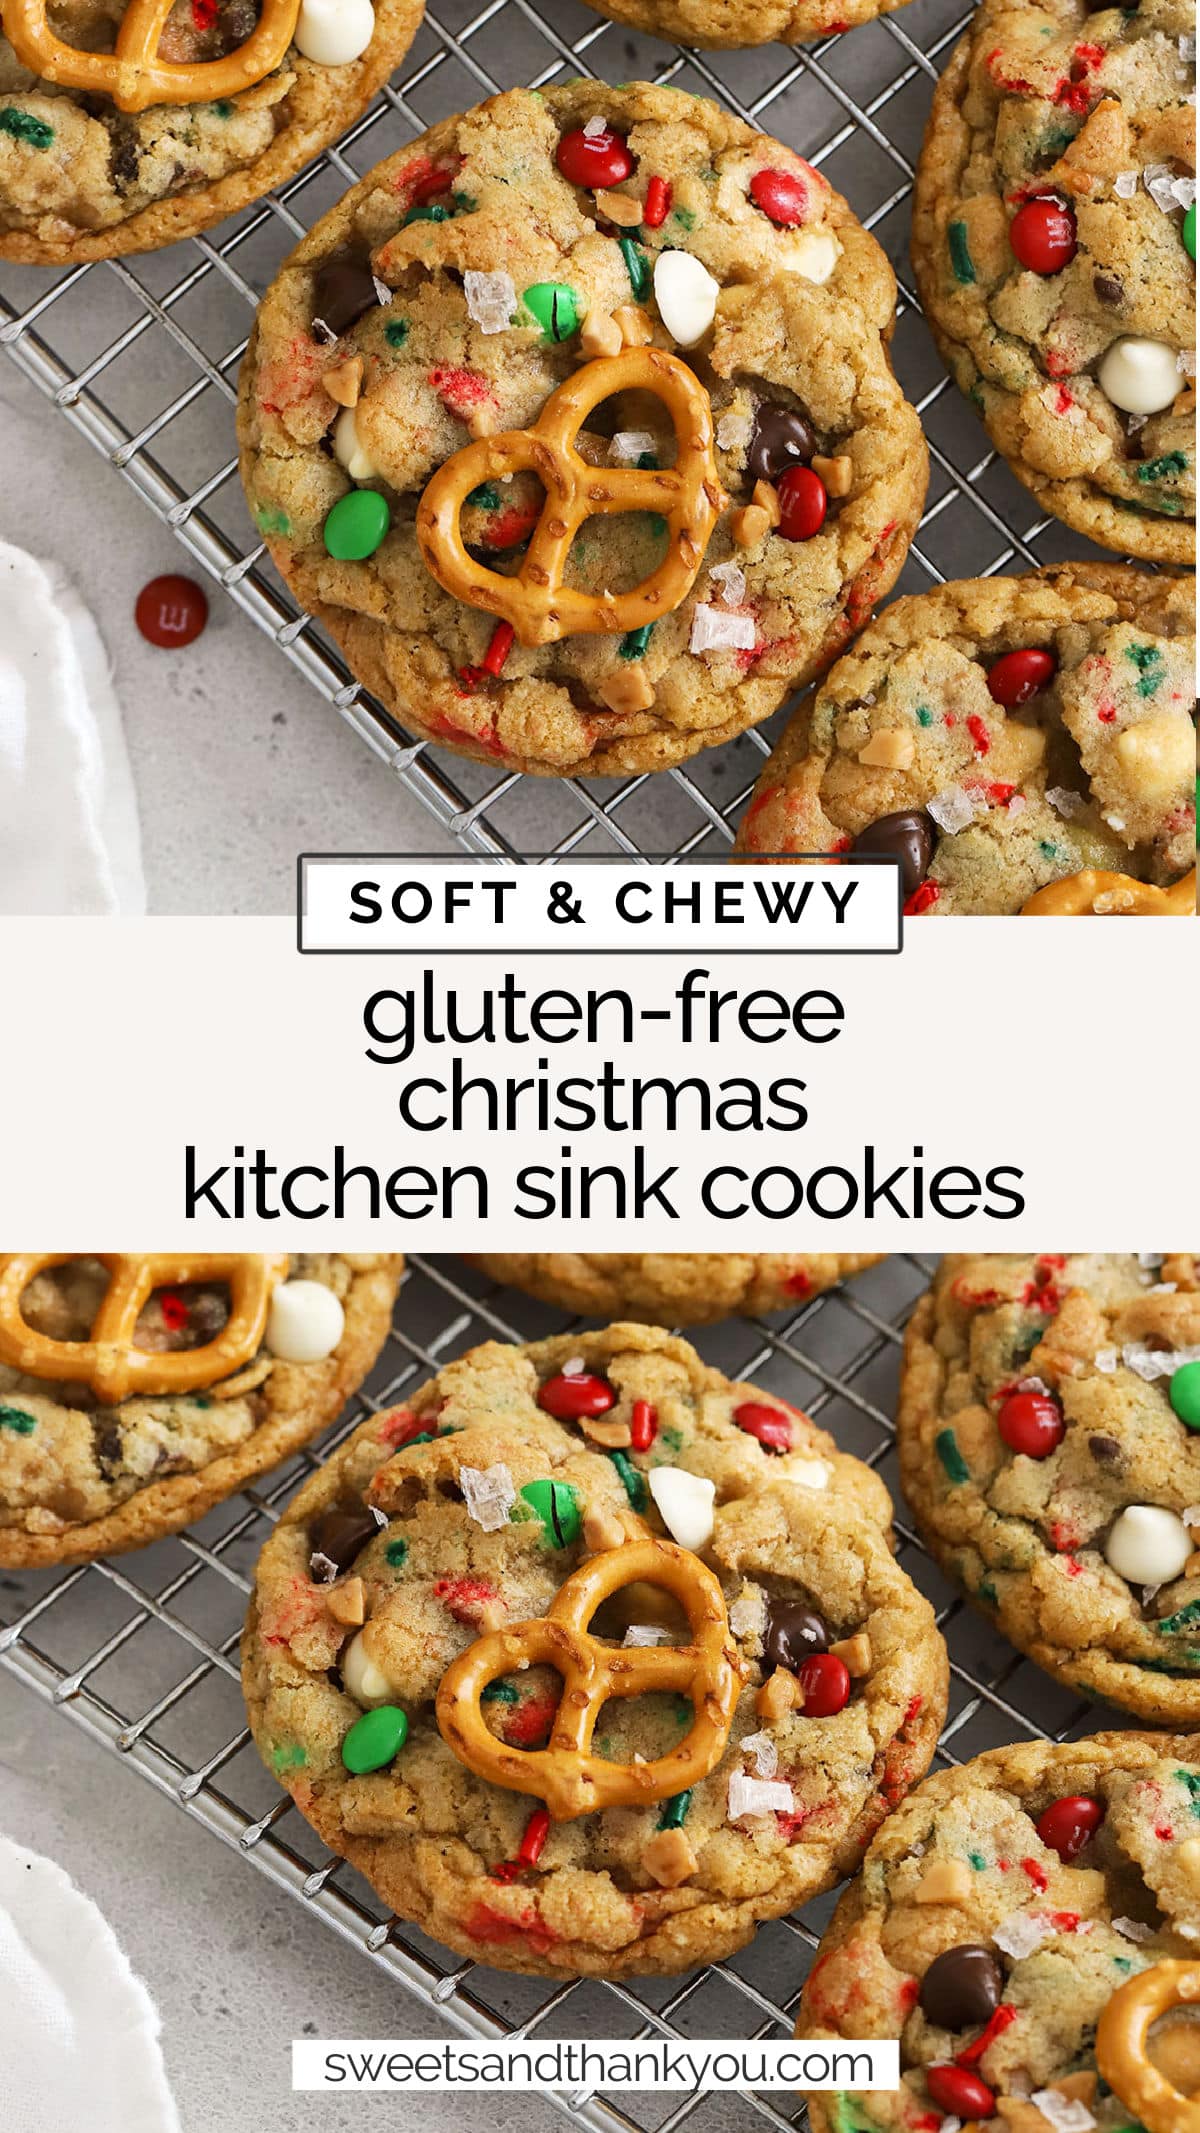 Looking for a fun gluten-free Christmas cookie to try this year? These Gluten-Free Christmas Kitchen Sink Cookies are here to deliver! They're packed with festive color & delicious flavor in every bite. Try them for a gluten-free cookie exchange, gluten-free cookie box, or to give to friends and neighbors. They're the cutest gluten-free holiday cookie recipe around!